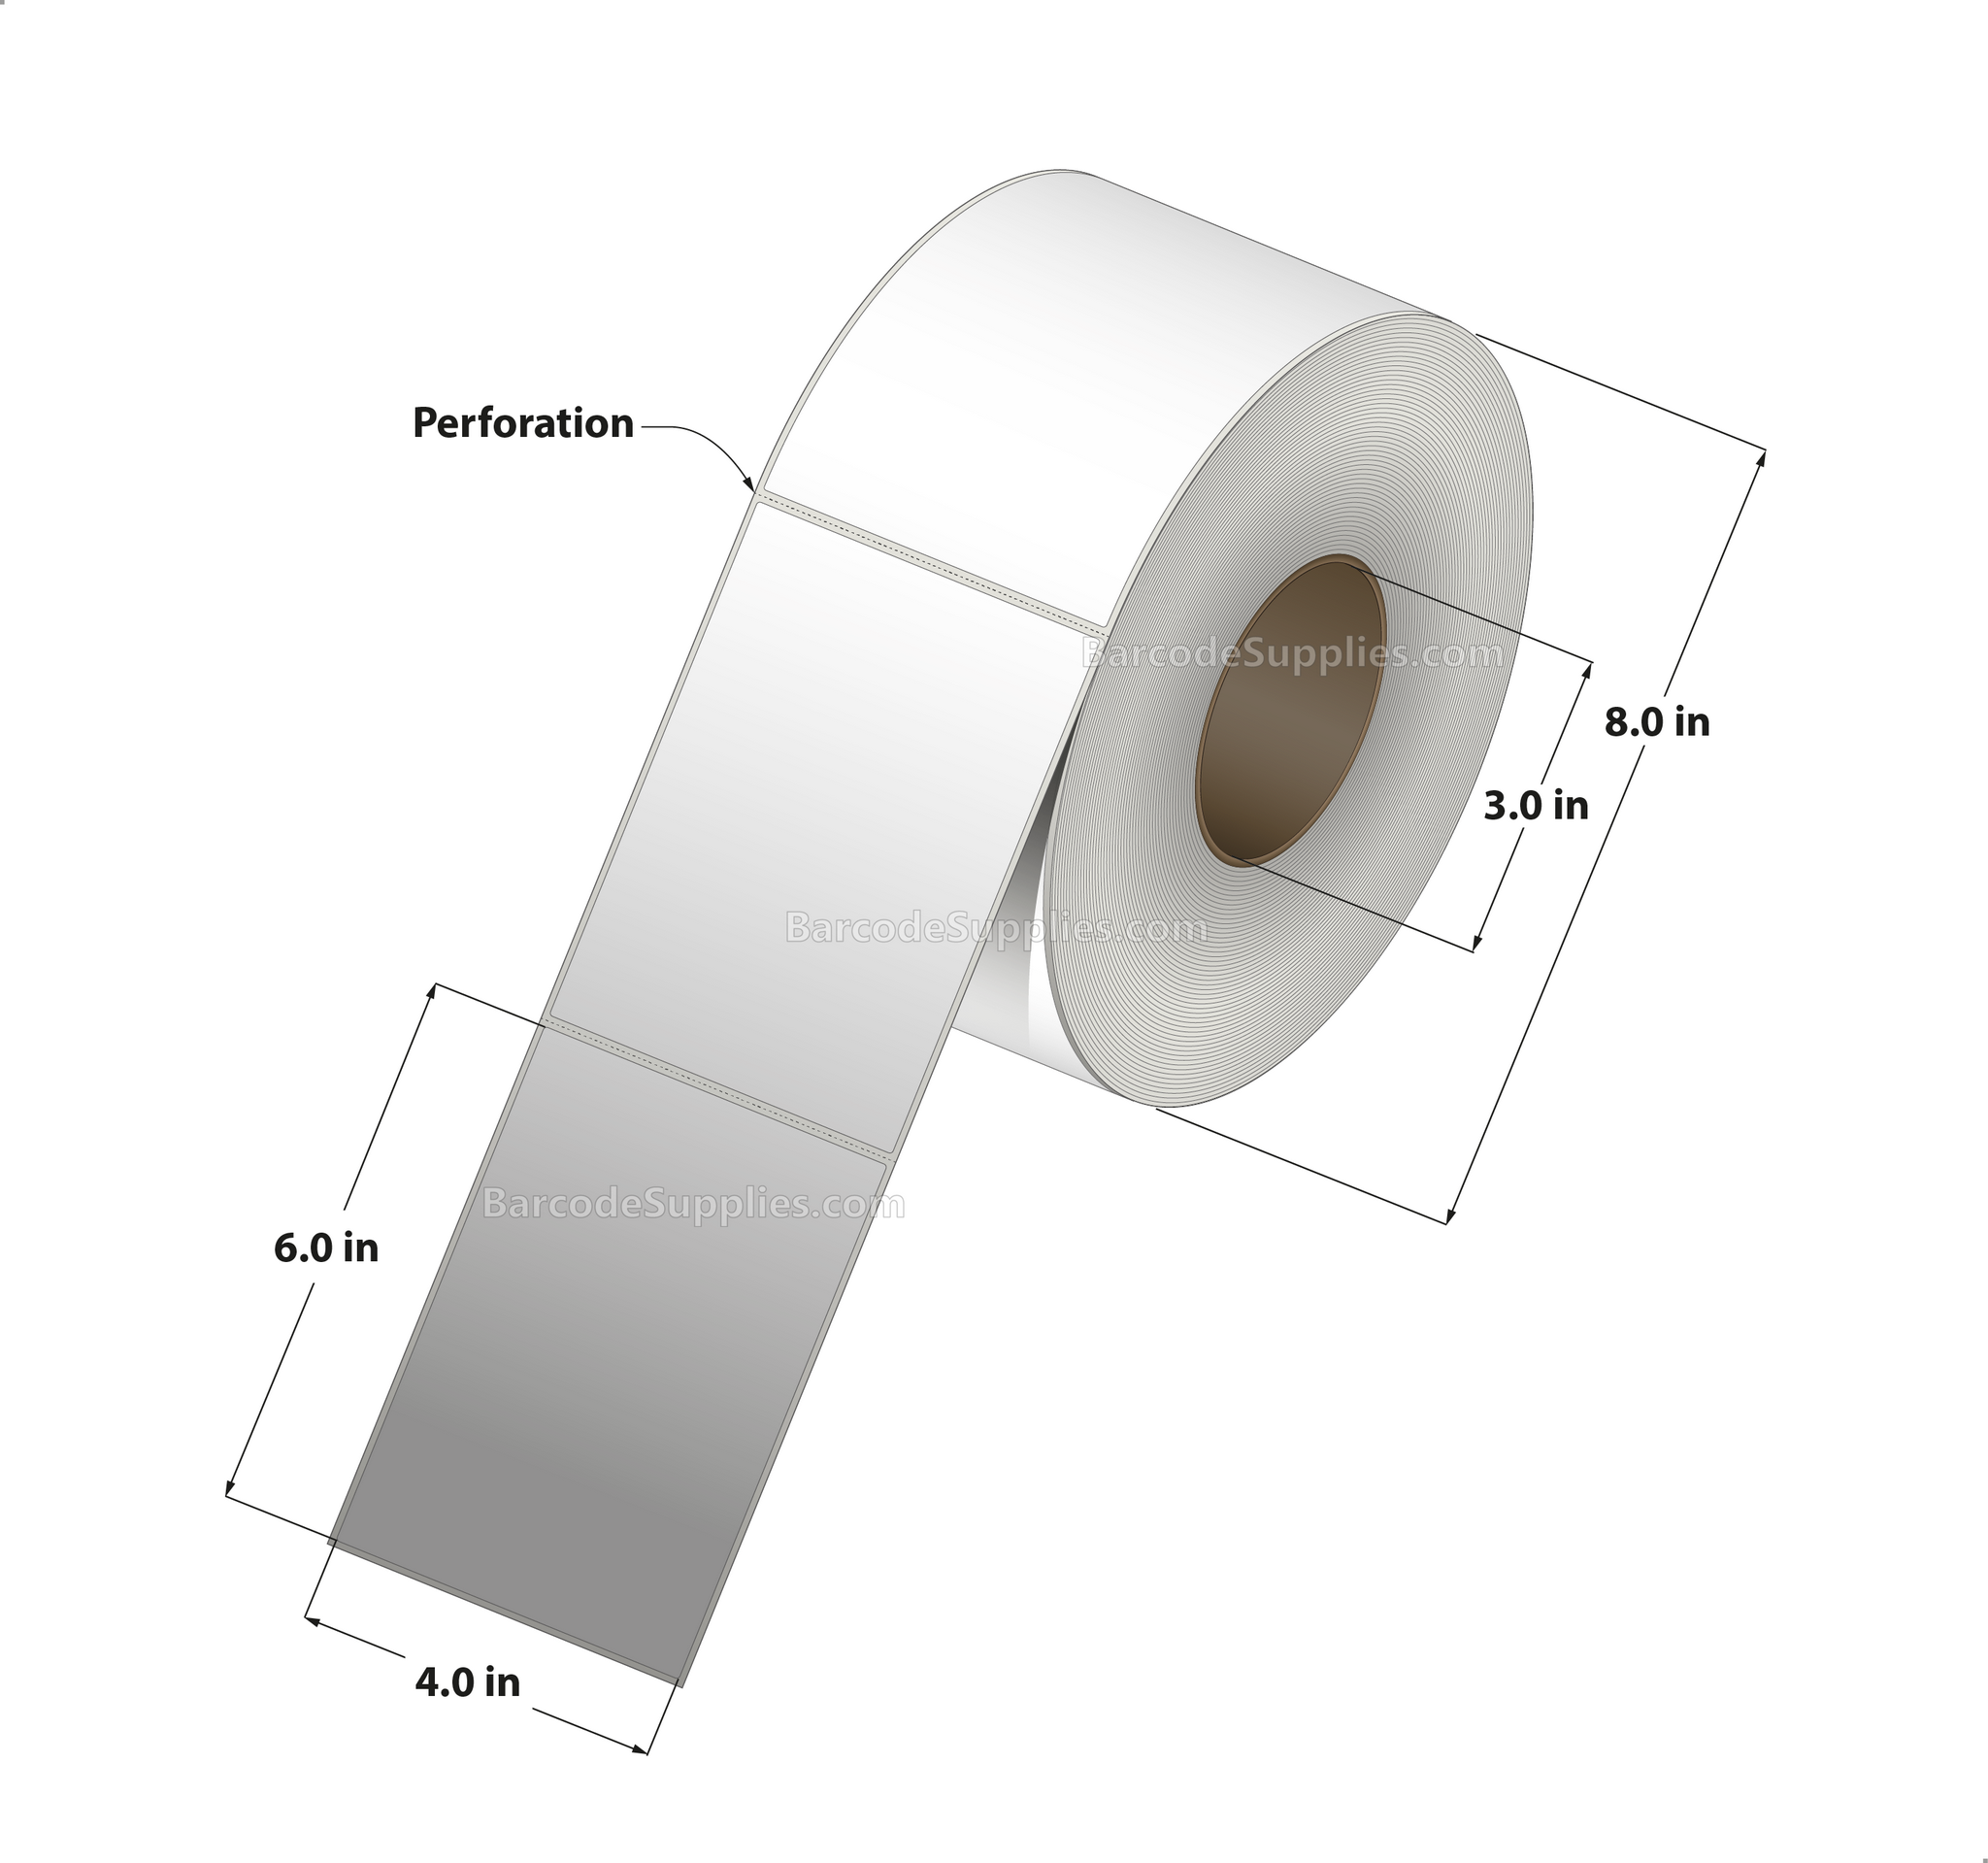 4 x 6 Thermal Transfer White Labels With Removable Adhesive - Perforated - 1000 Labels Per Roll - Carton Of 4 Rolls - 4000 Labels Total - MPN: TH46-1PREM